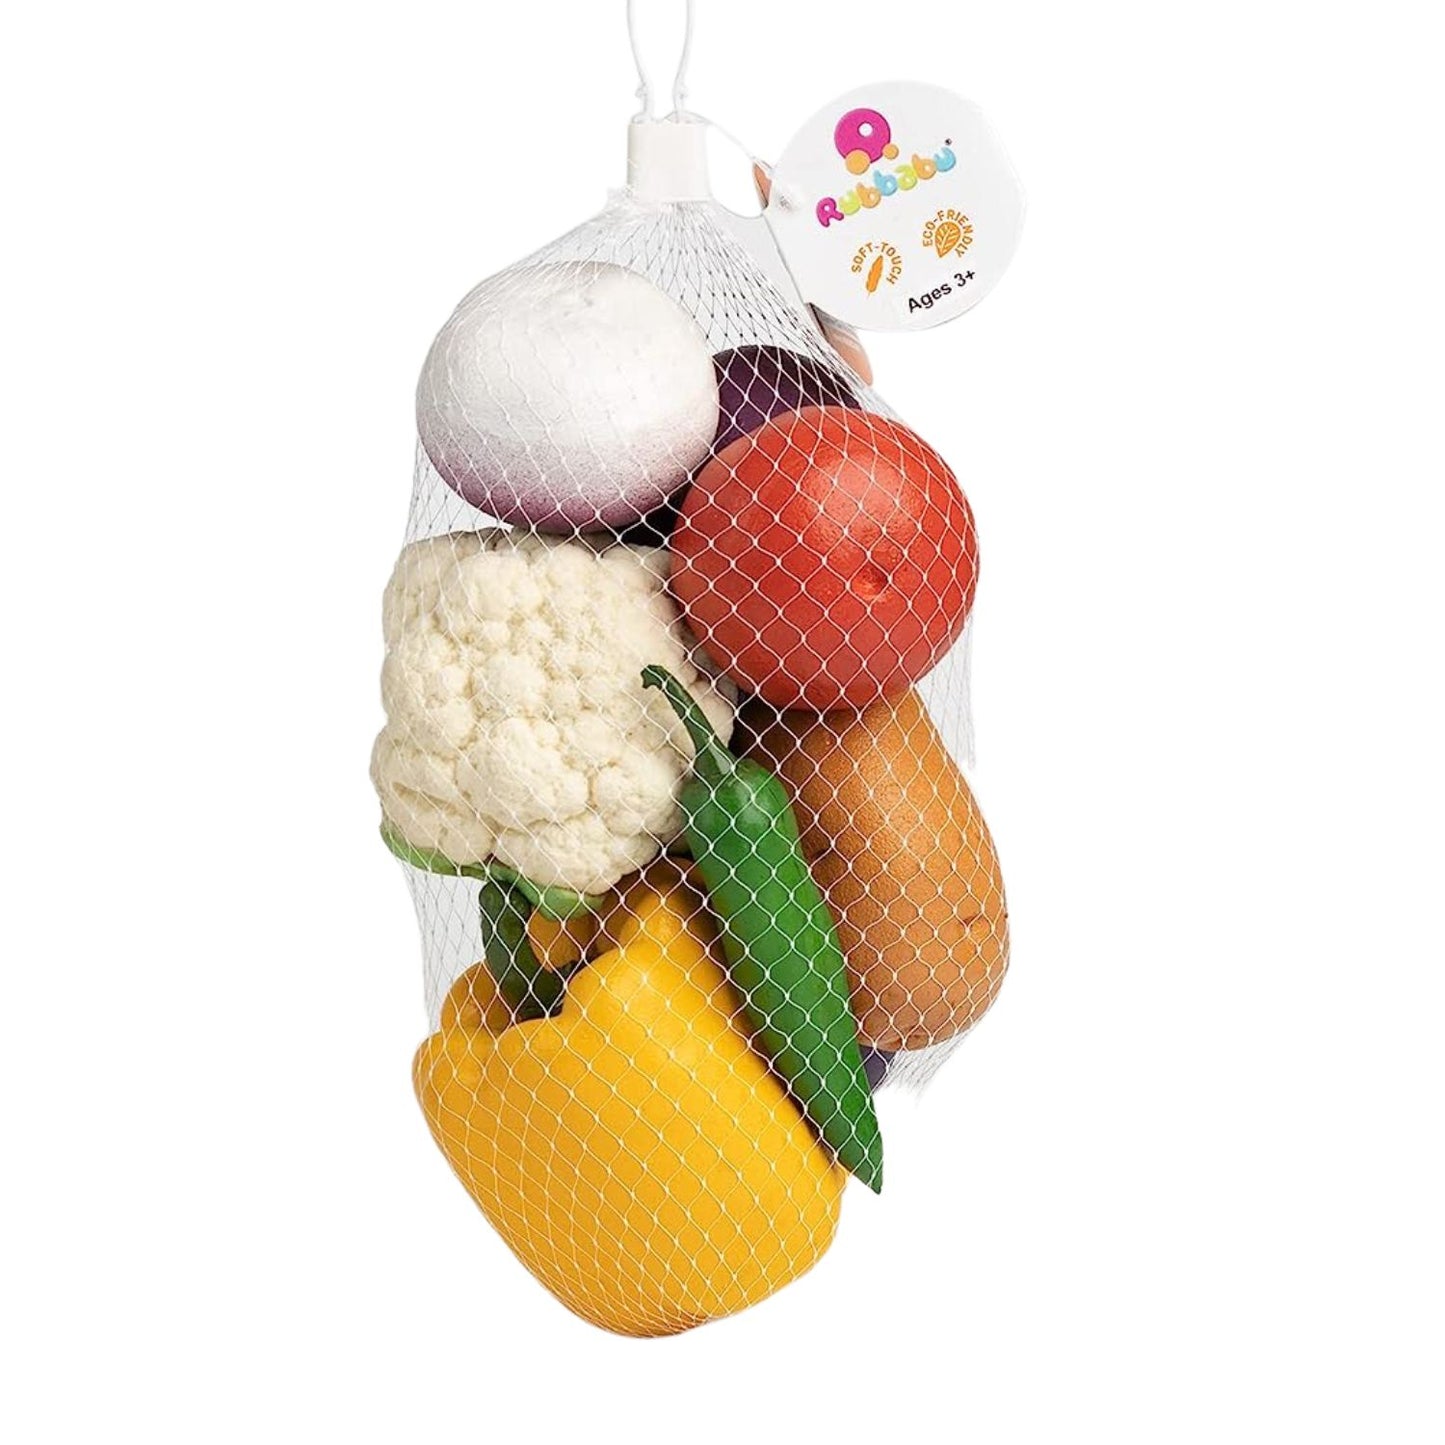 RUBBABU Award-Winning Natural Rubber Vegetable Set, Safe & Soft Toy for Kids, Toddlers, Multicolour - Educational & Eco-Friendly